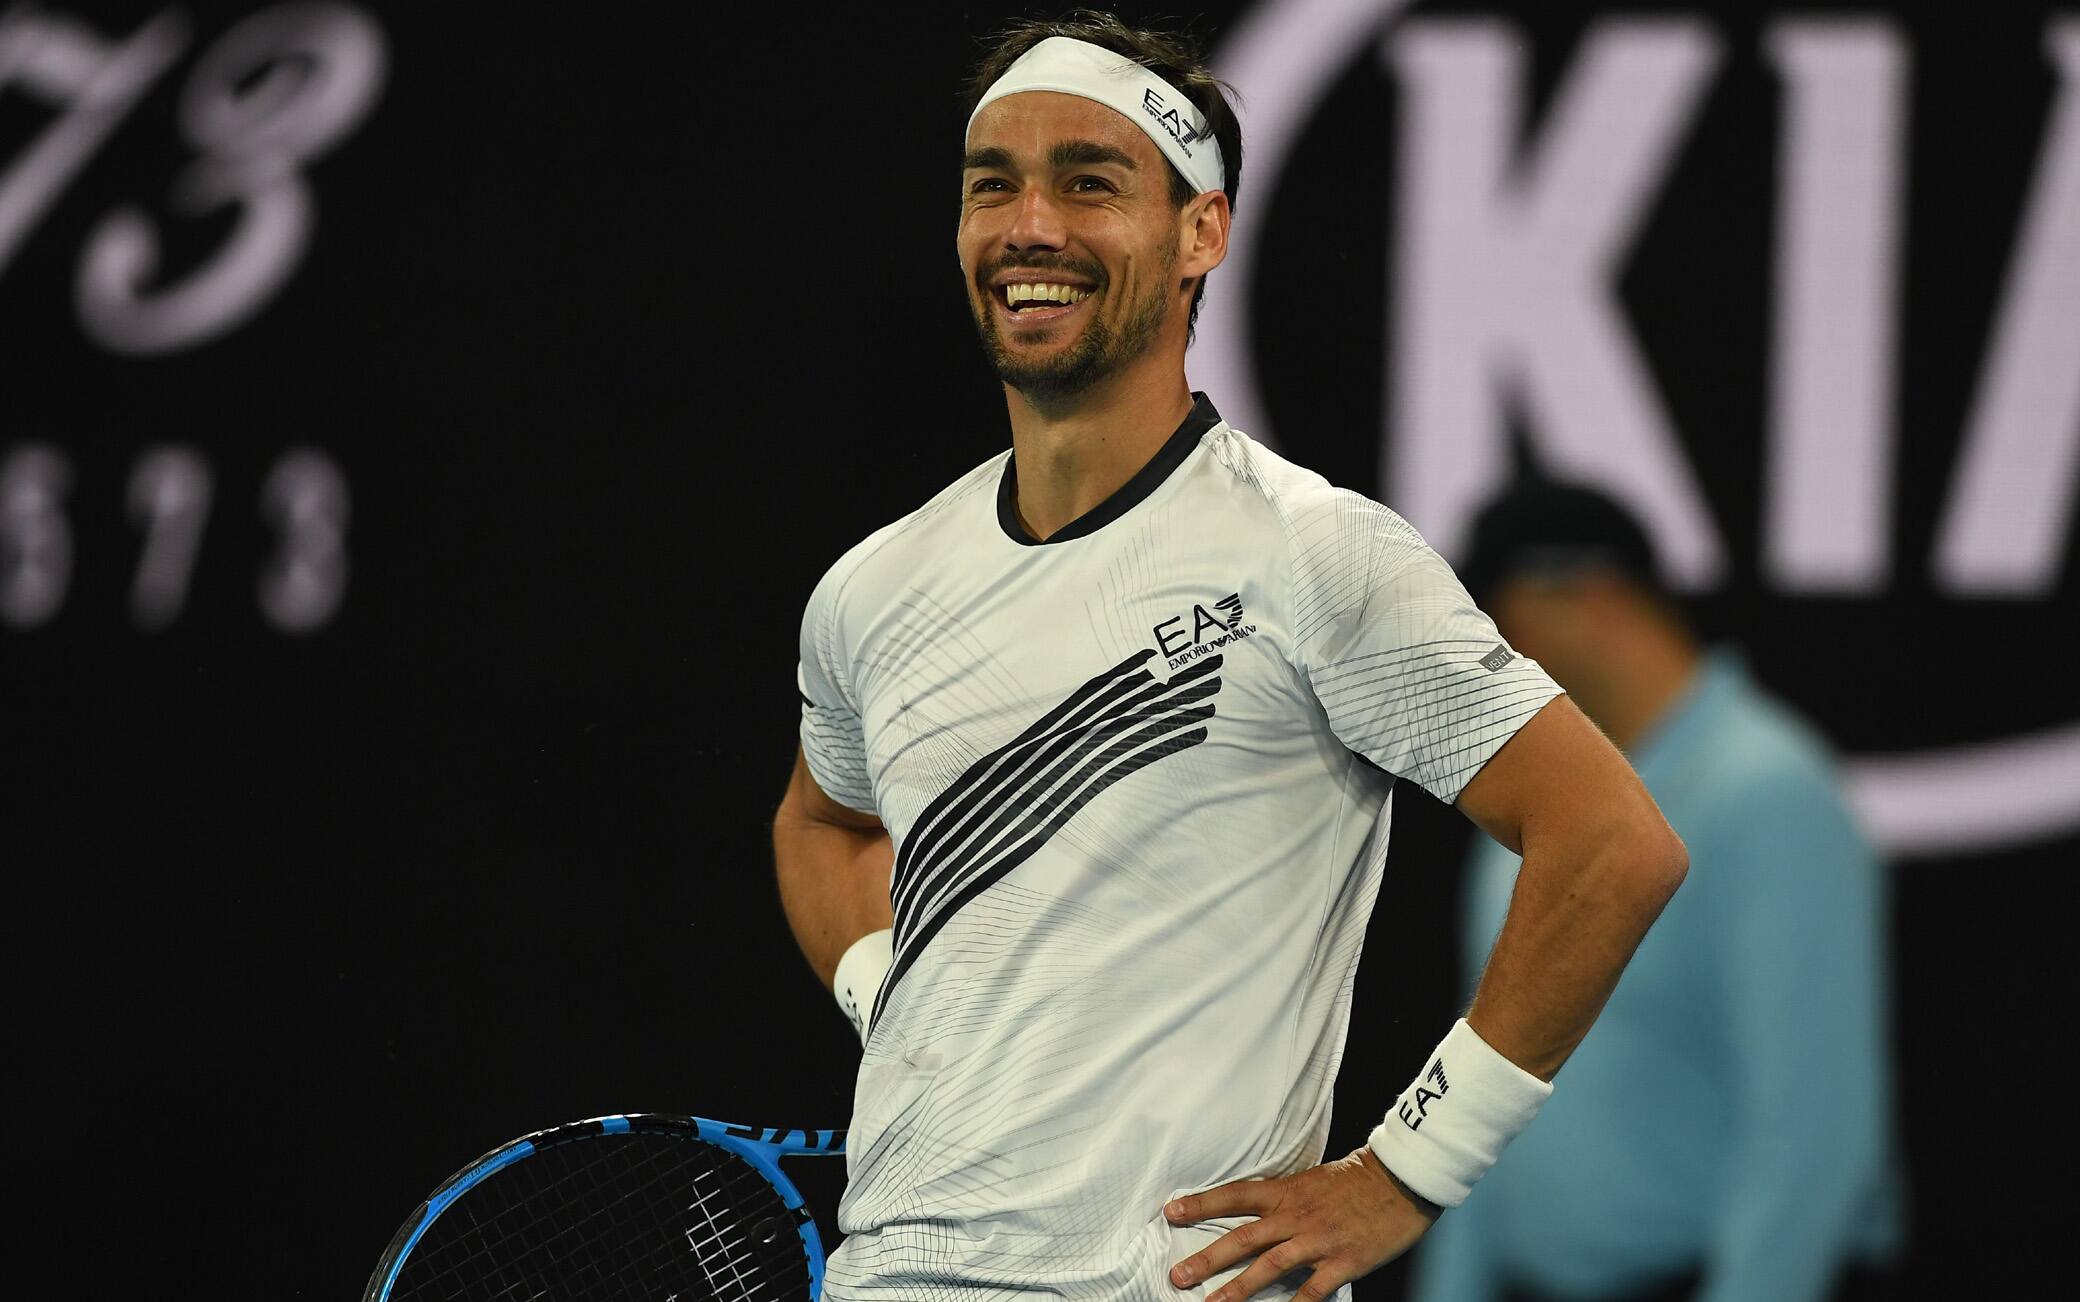 Italy's Fabio Fognini reacts after a point against Argentina's Guido Pella during their men's singles match on day five of the Australian Open tennis tournament in Melbourne on January 24, 2020. (Photo by Greg Wood / AFP) / IMAGE RESTRICTED TO EDITORIAL USE - STRICTLY NO COMMERCIAL USE (Photo by GREG WOOD/AFP via Getty Images)